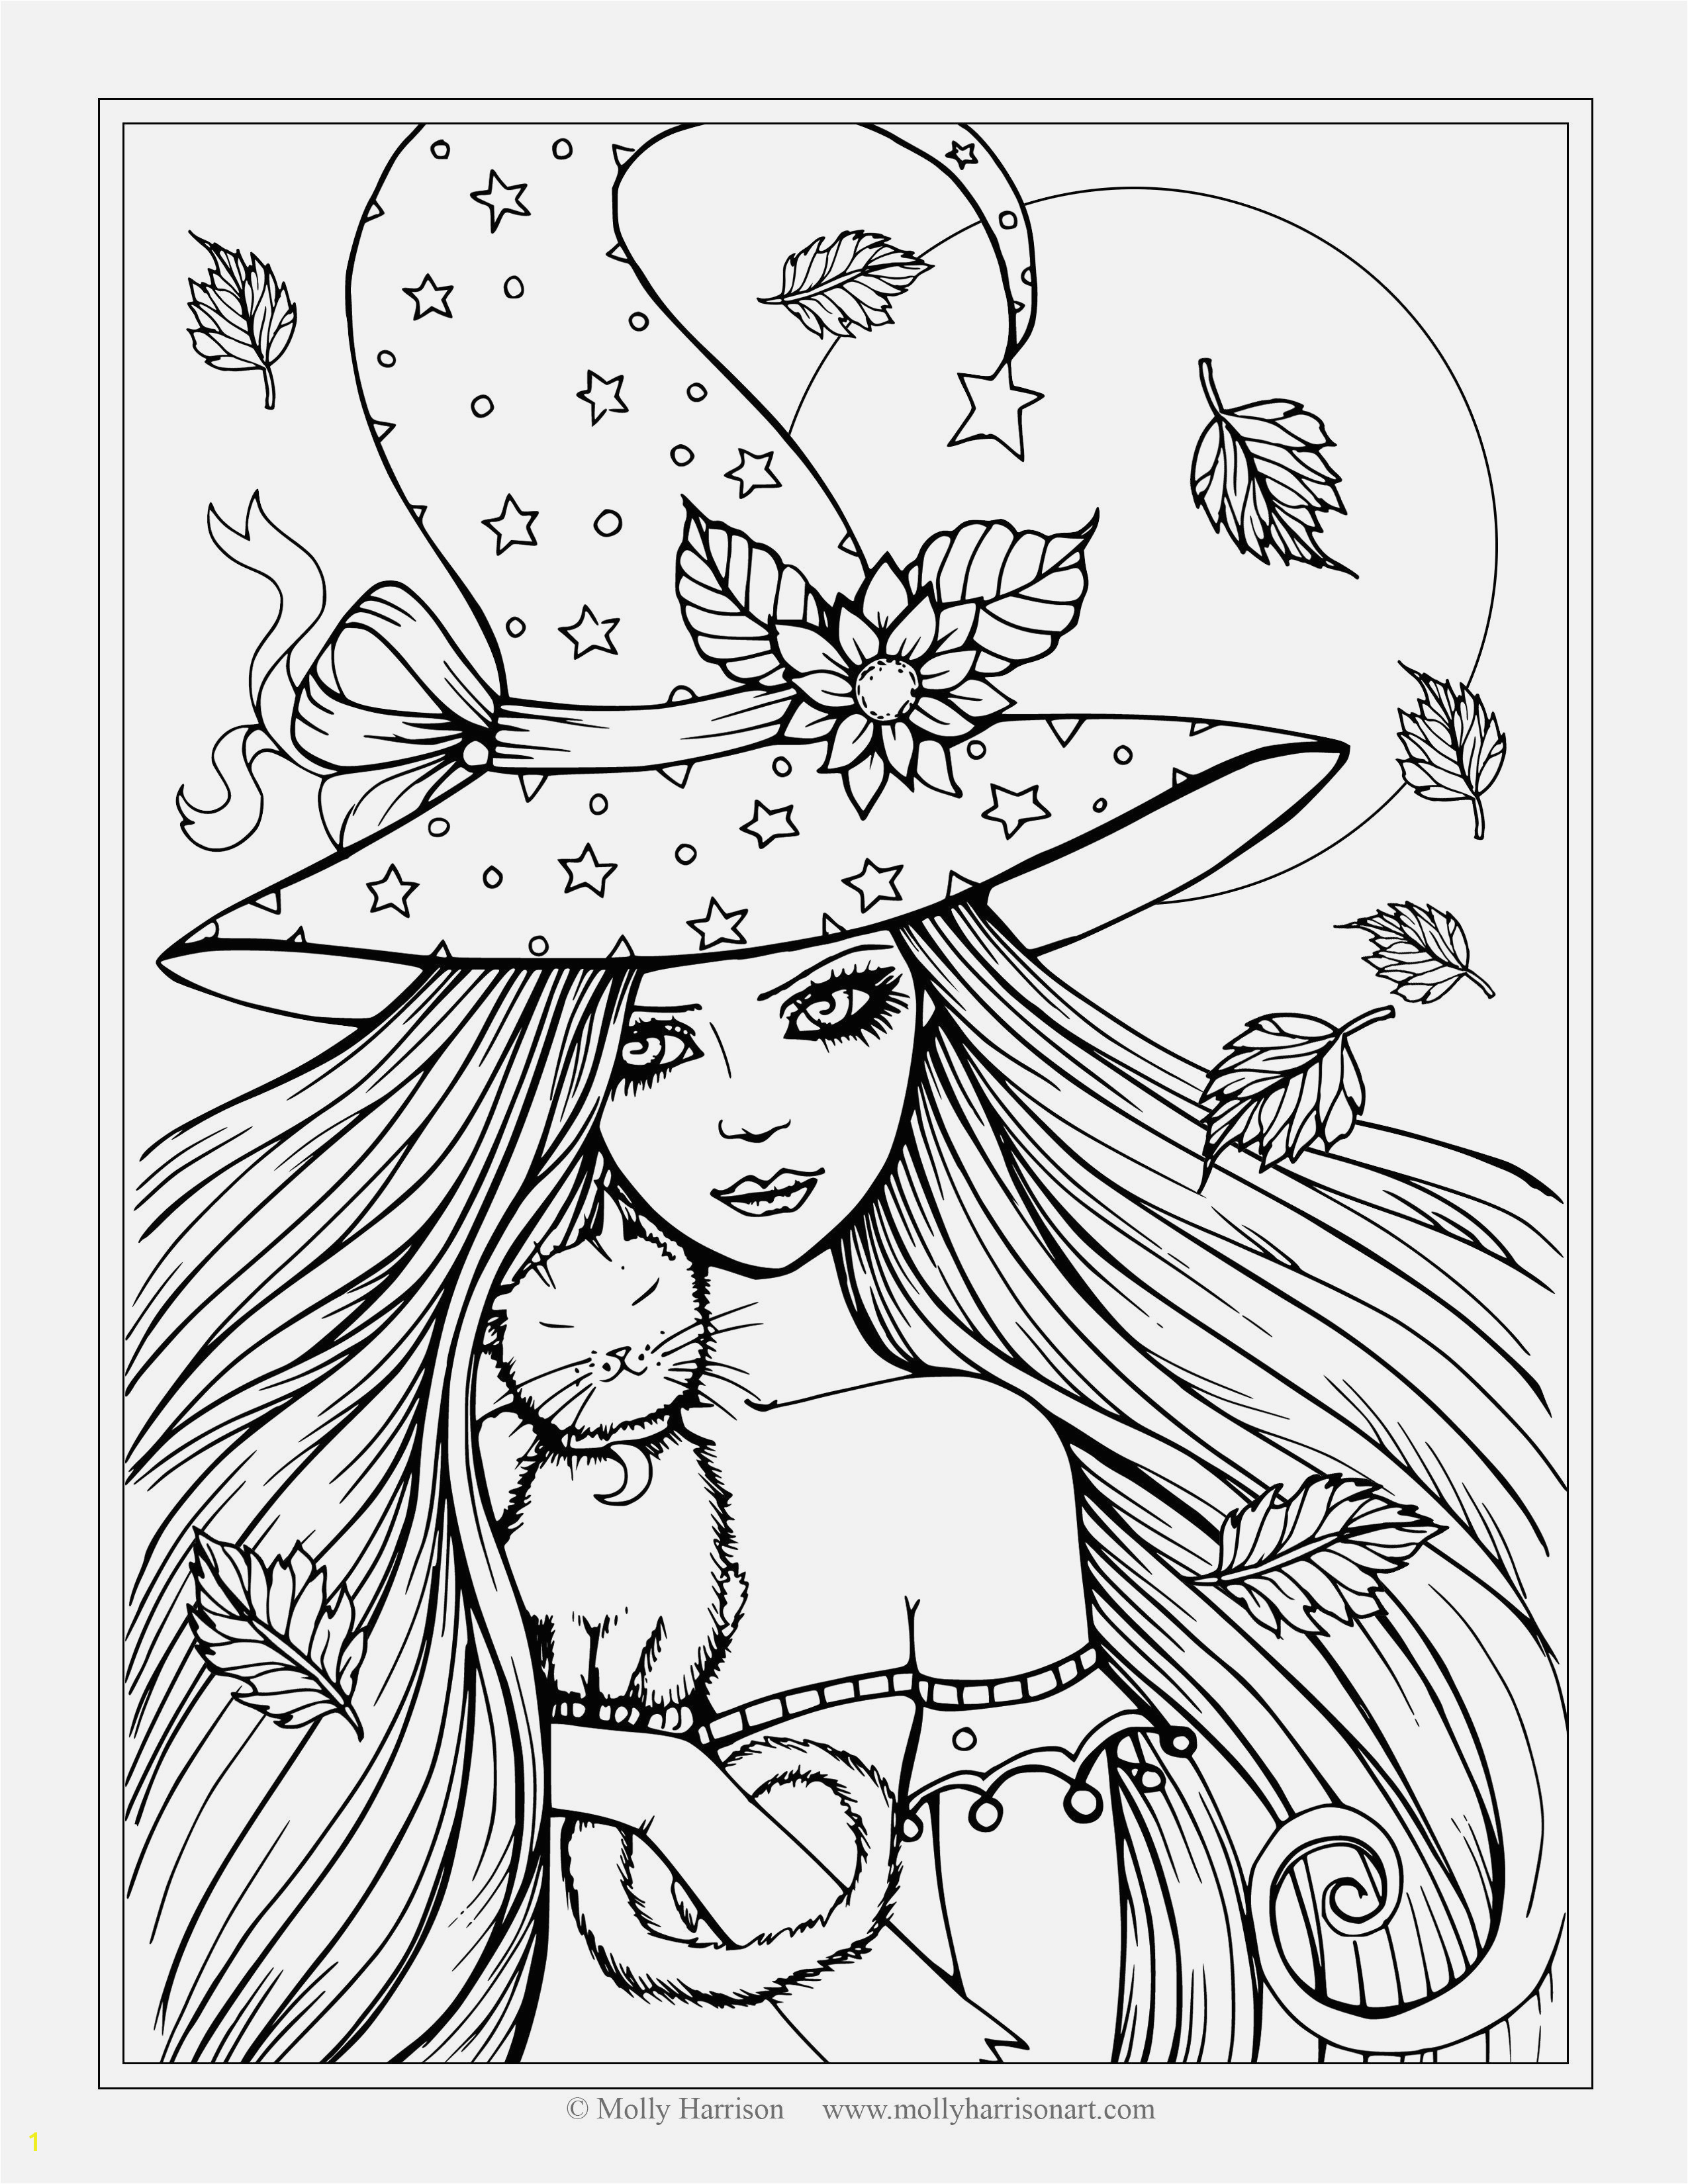 Coloring Pages Hard Free Printable Coloring Pages for Girls 12 and Up Luxury Jesus Gather with